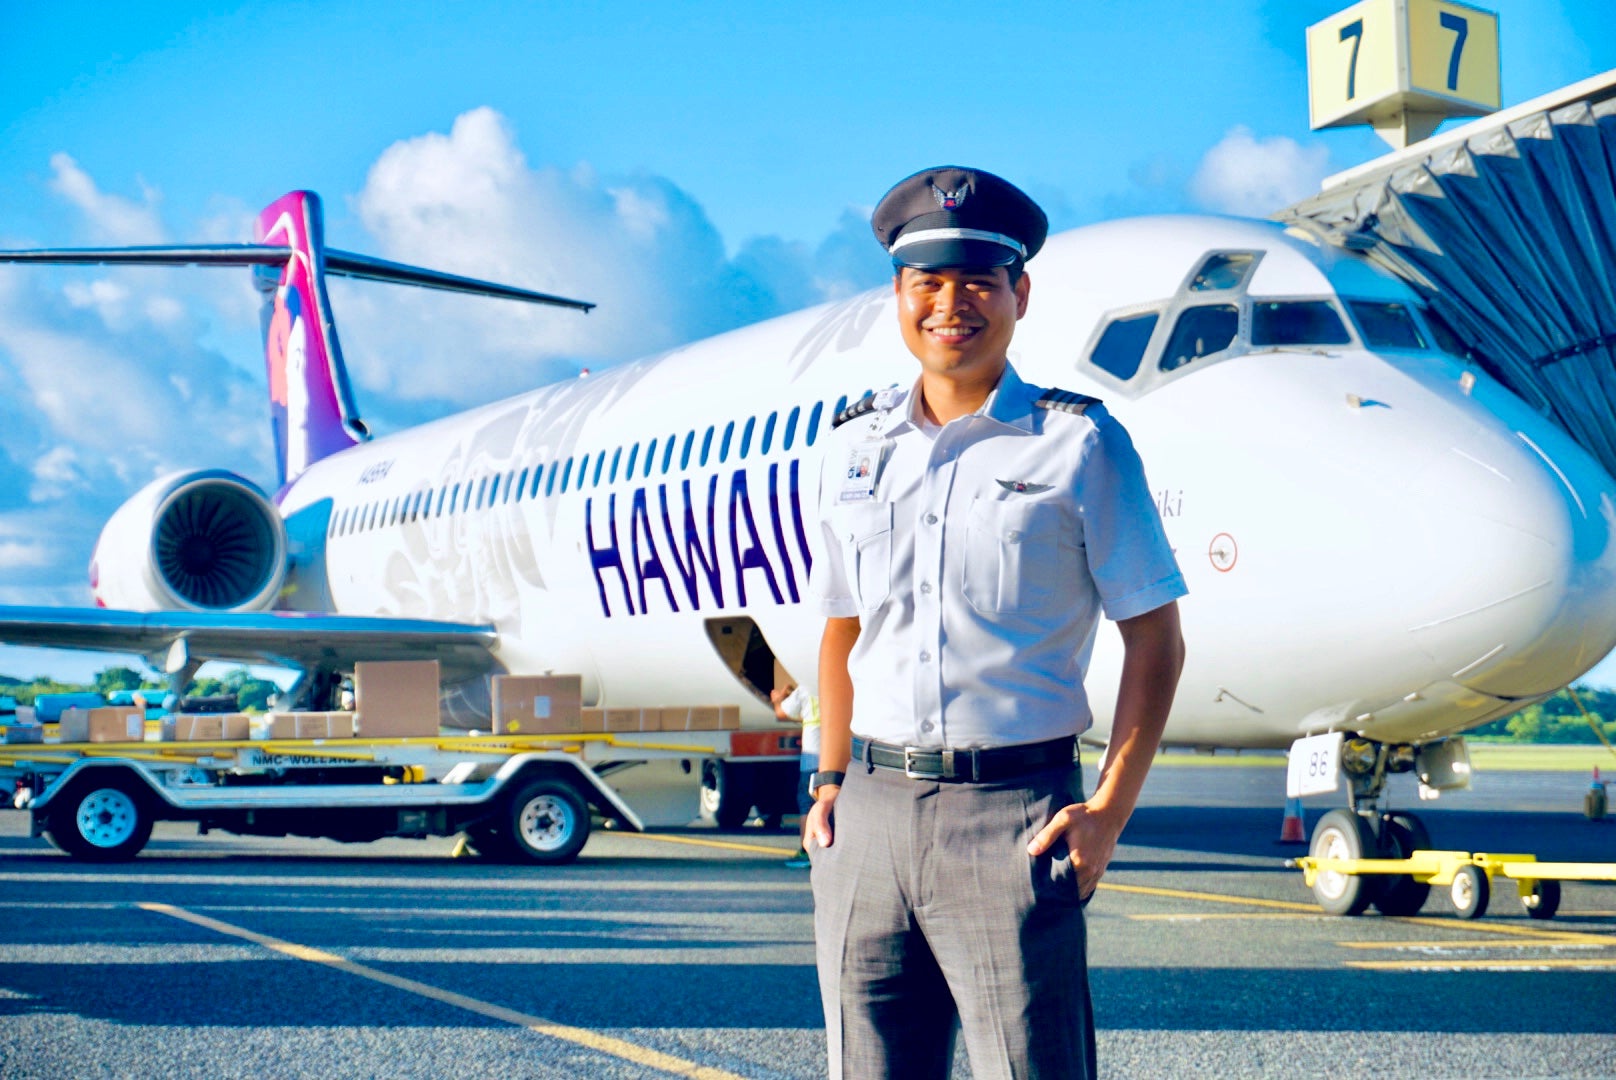 Ian Ramos is now a pilot for Hawaiian Airlines.